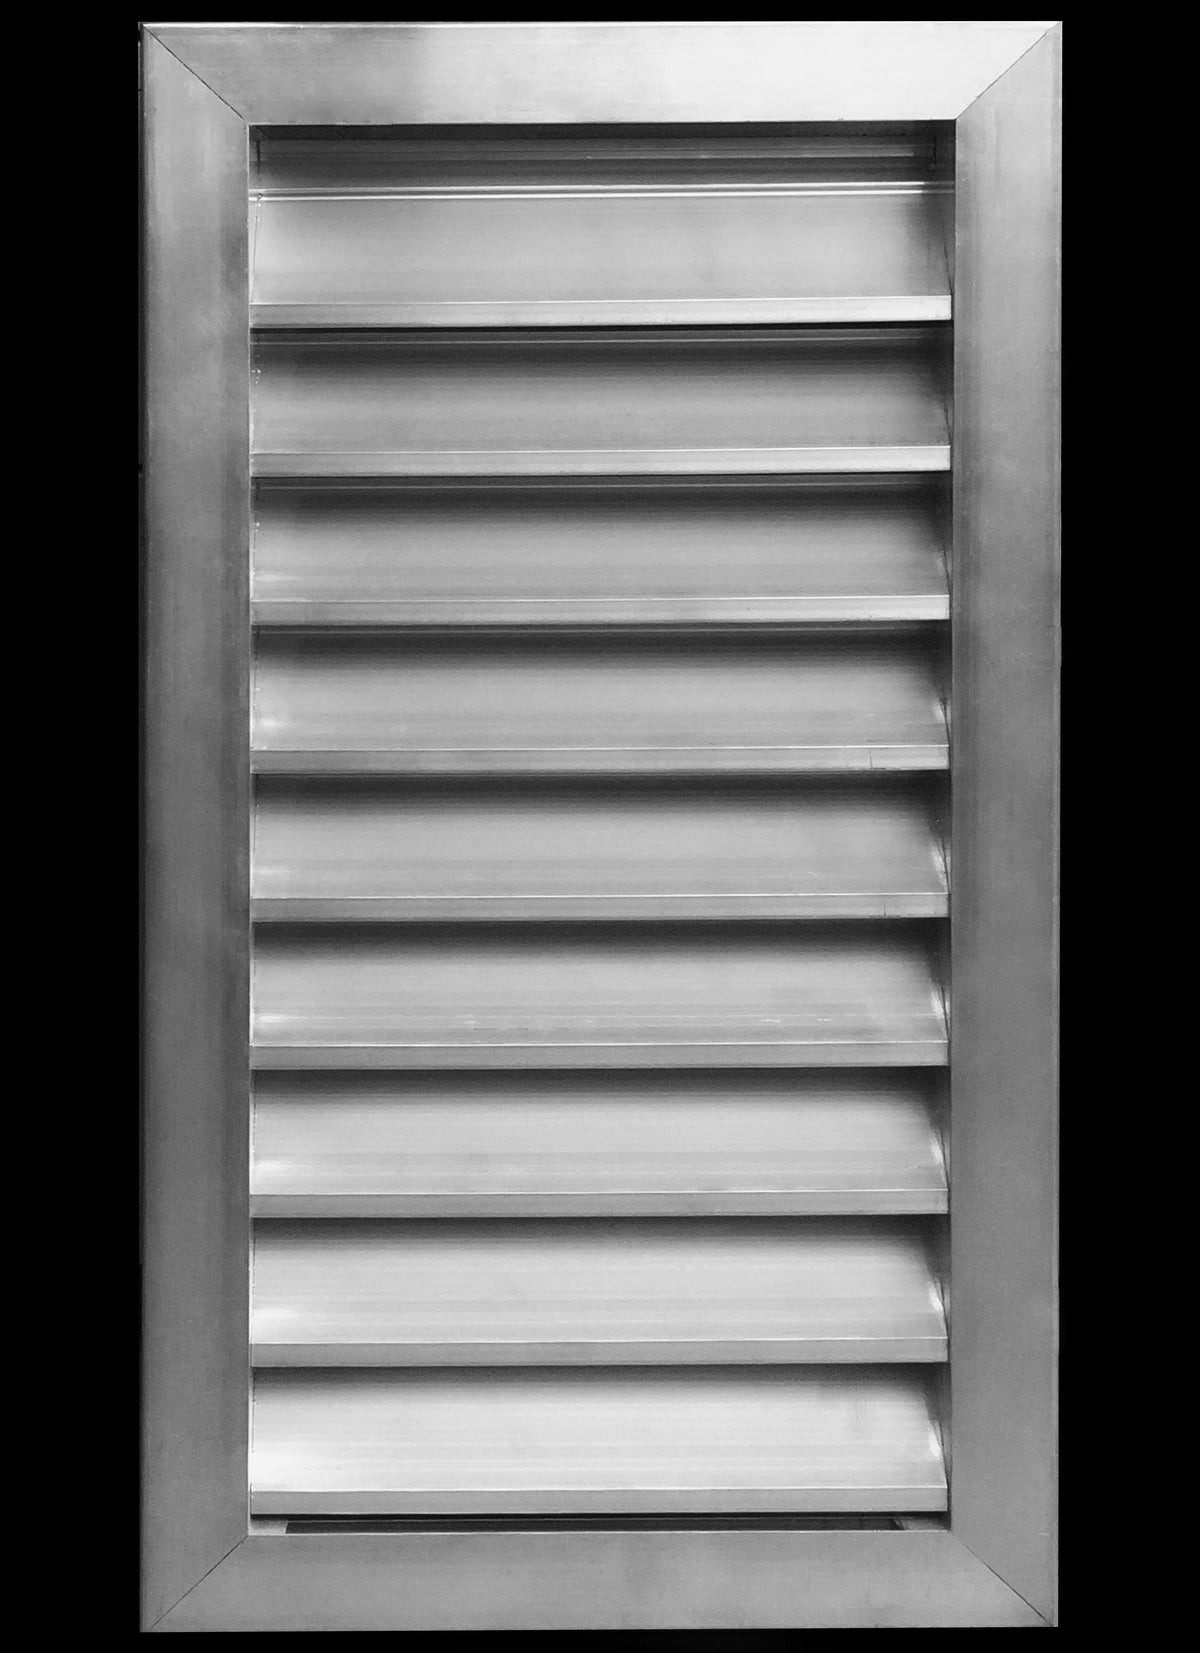 10&quot;w X 22&quot;h Aluminum Outdoor Weather Proof Louvers - Rain &amp; Waterproof Air Vent With Screen Mesh